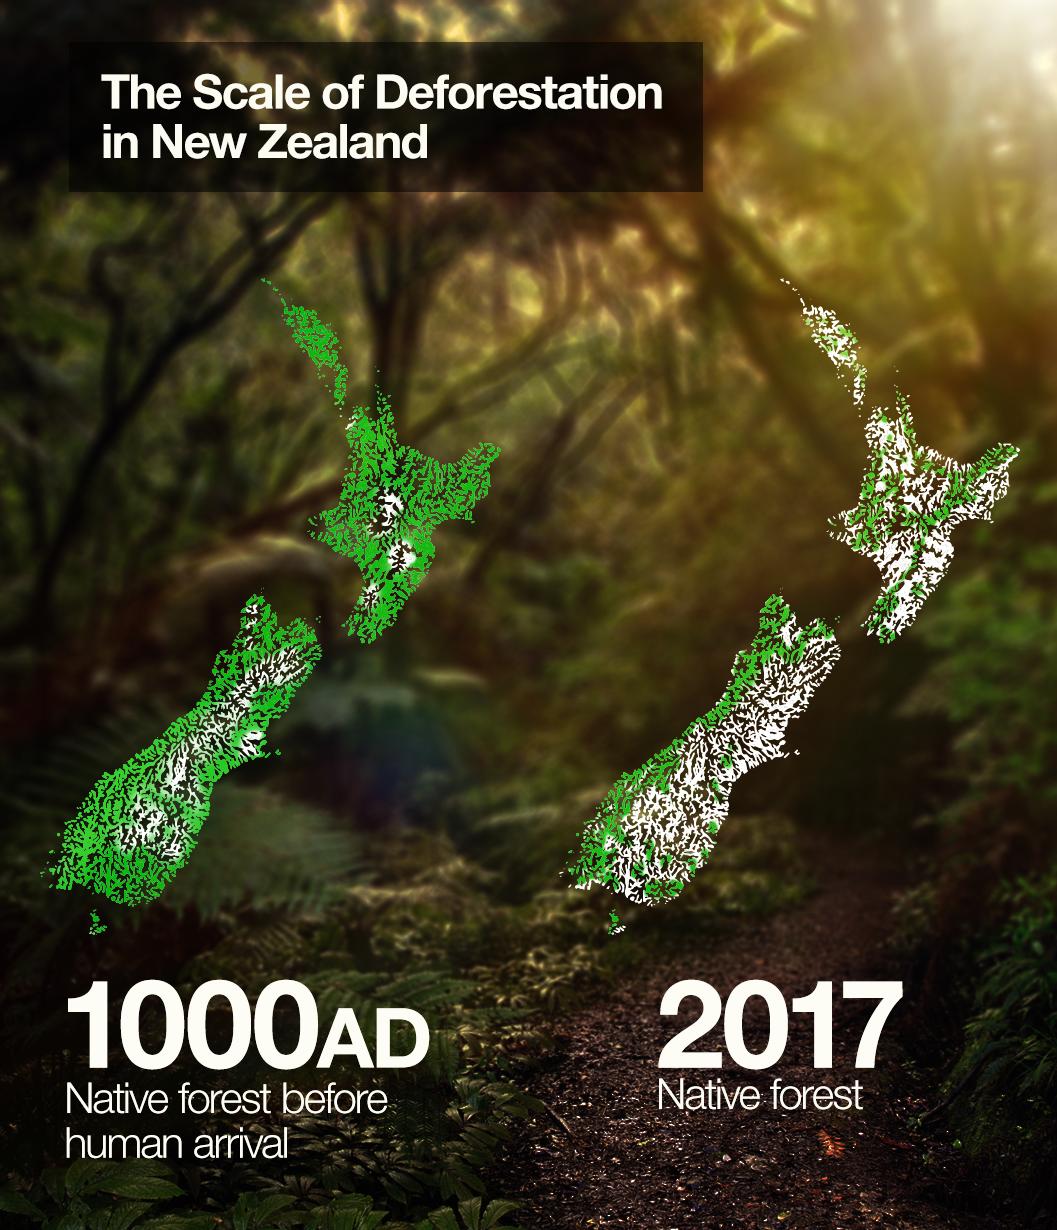 Special report: how polluted are New Zealand's rivers? | Newshub